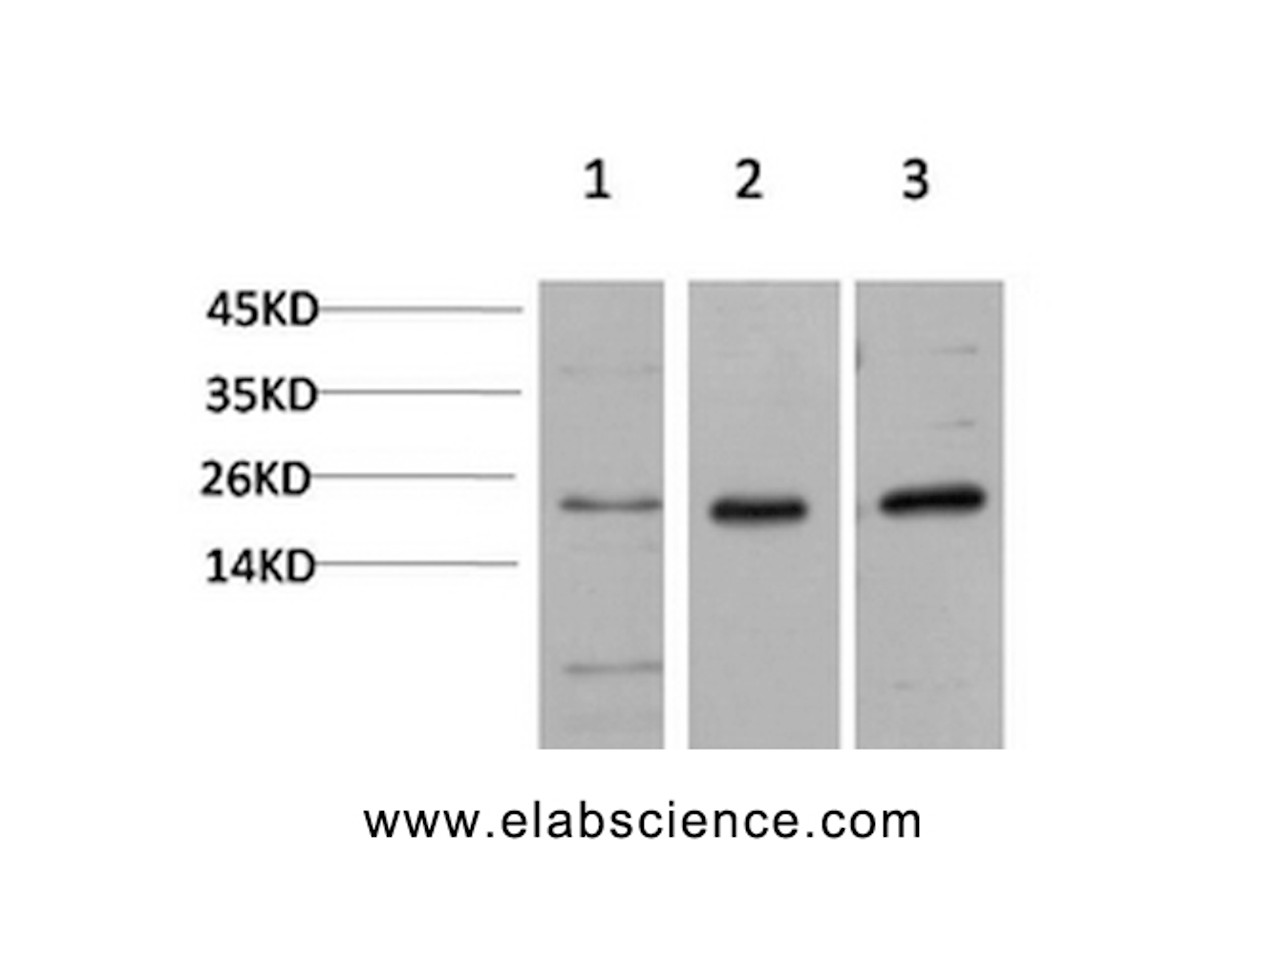 Western Blot analysis of 1) Hela, 2)3T3, 3) PC-12 cells using CBX5 Monoclonal Antibody at dilution of 1:1000.